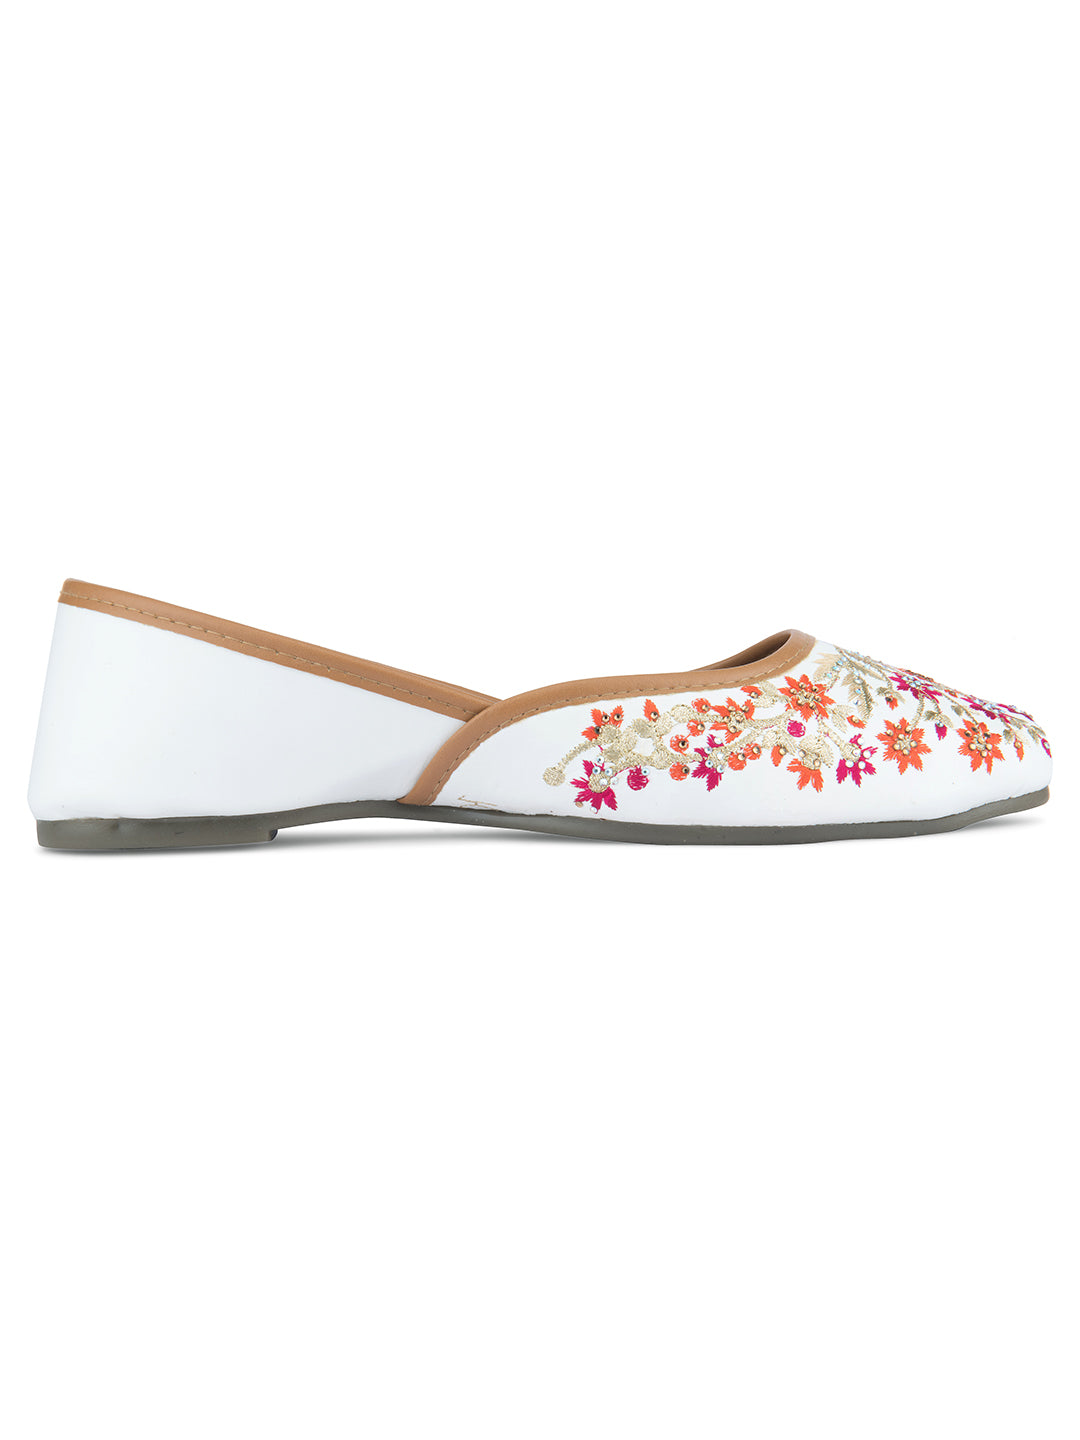 Women's White Handcrafted Stone Work  Indian Ethnic Comfort Footwear - Desi Colour